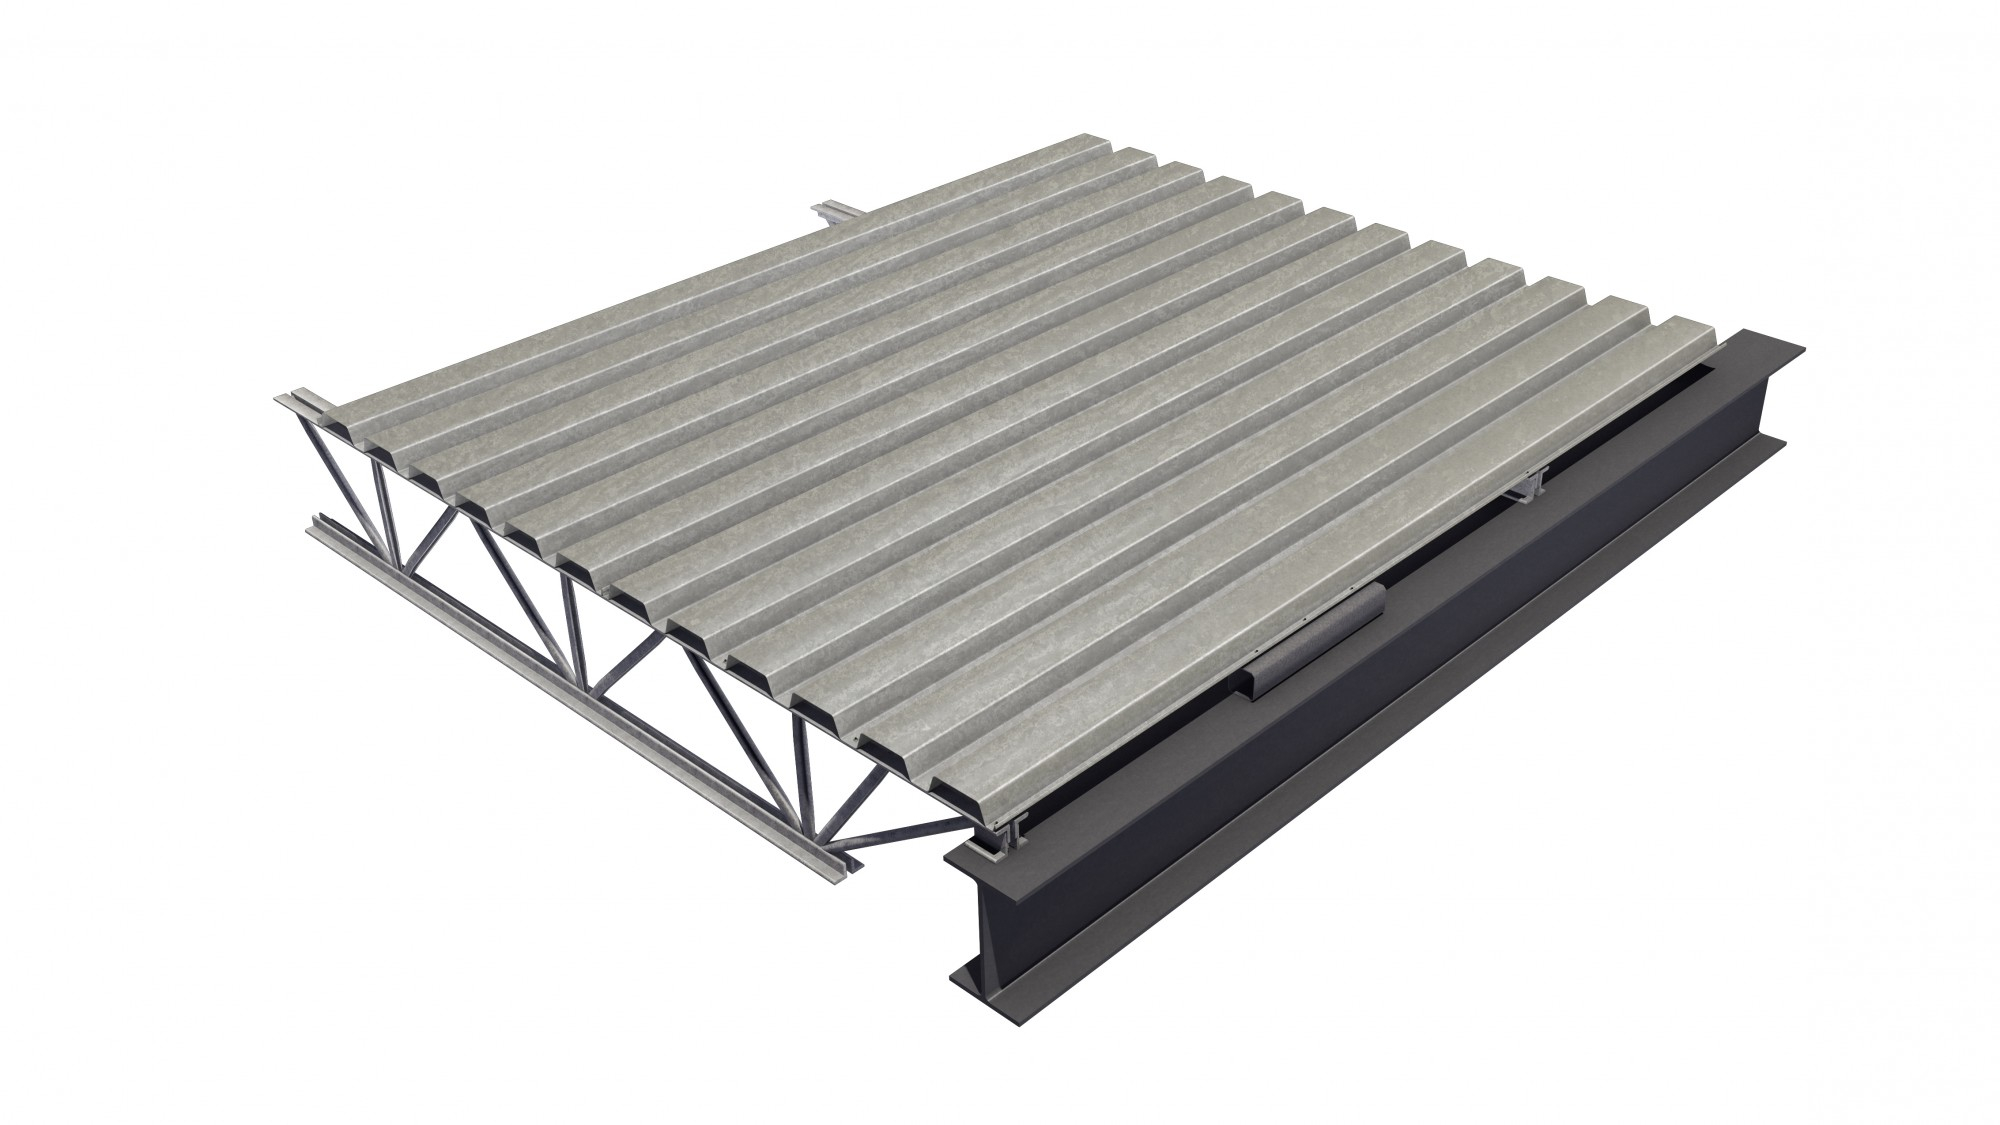 Steel Deck Is A Cold Formed Corrugated Steel Sheet Canam Buildings In Dimensions 2000 X 1125 